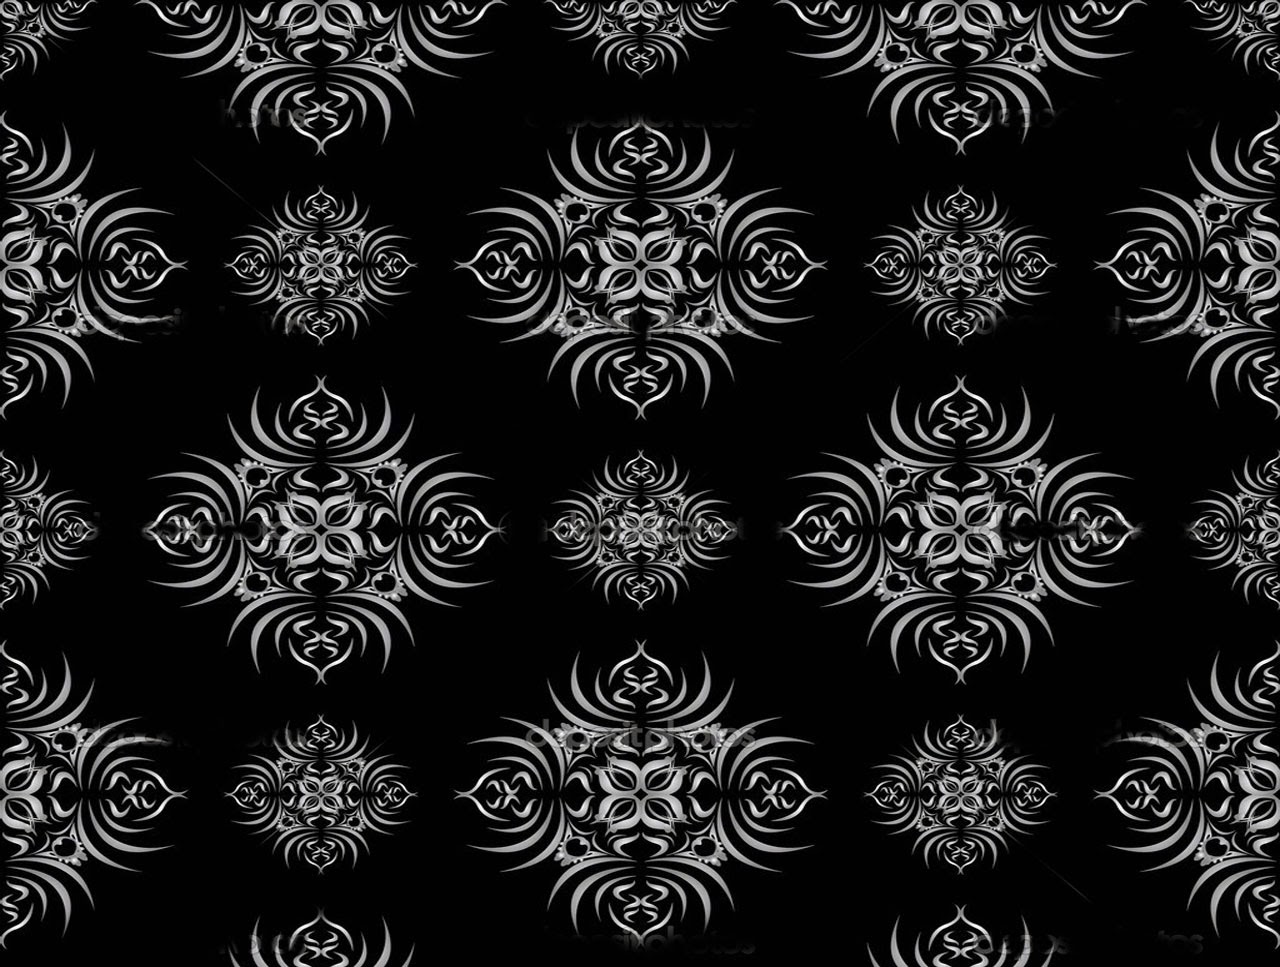 Free Download Desire Damask Wallpaper Petrol Blue And Dark Blue Colour